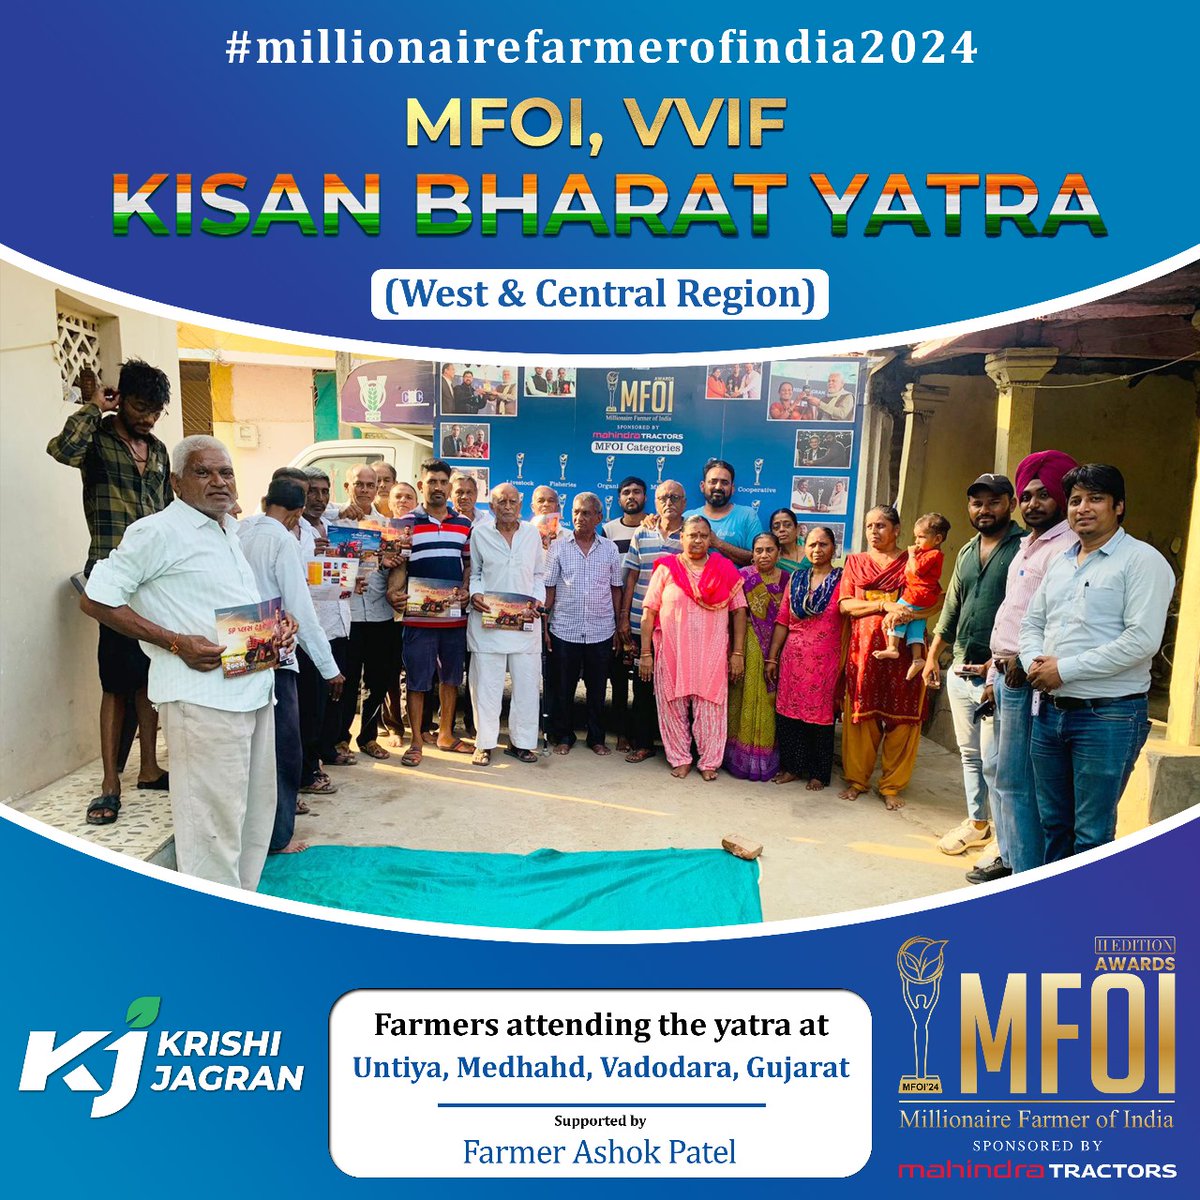 Krishi Jagran ‘MFOI, VVIF Kisan Bharat Yatra’, sponsored by Mahindra Tractors, is traversing across the West and Central regions of the nation. Currently, farmers are attending the yatra at Itola, Kherda, Untiya in Vadodara, Gujarat. We are grateful for the support of farmers,